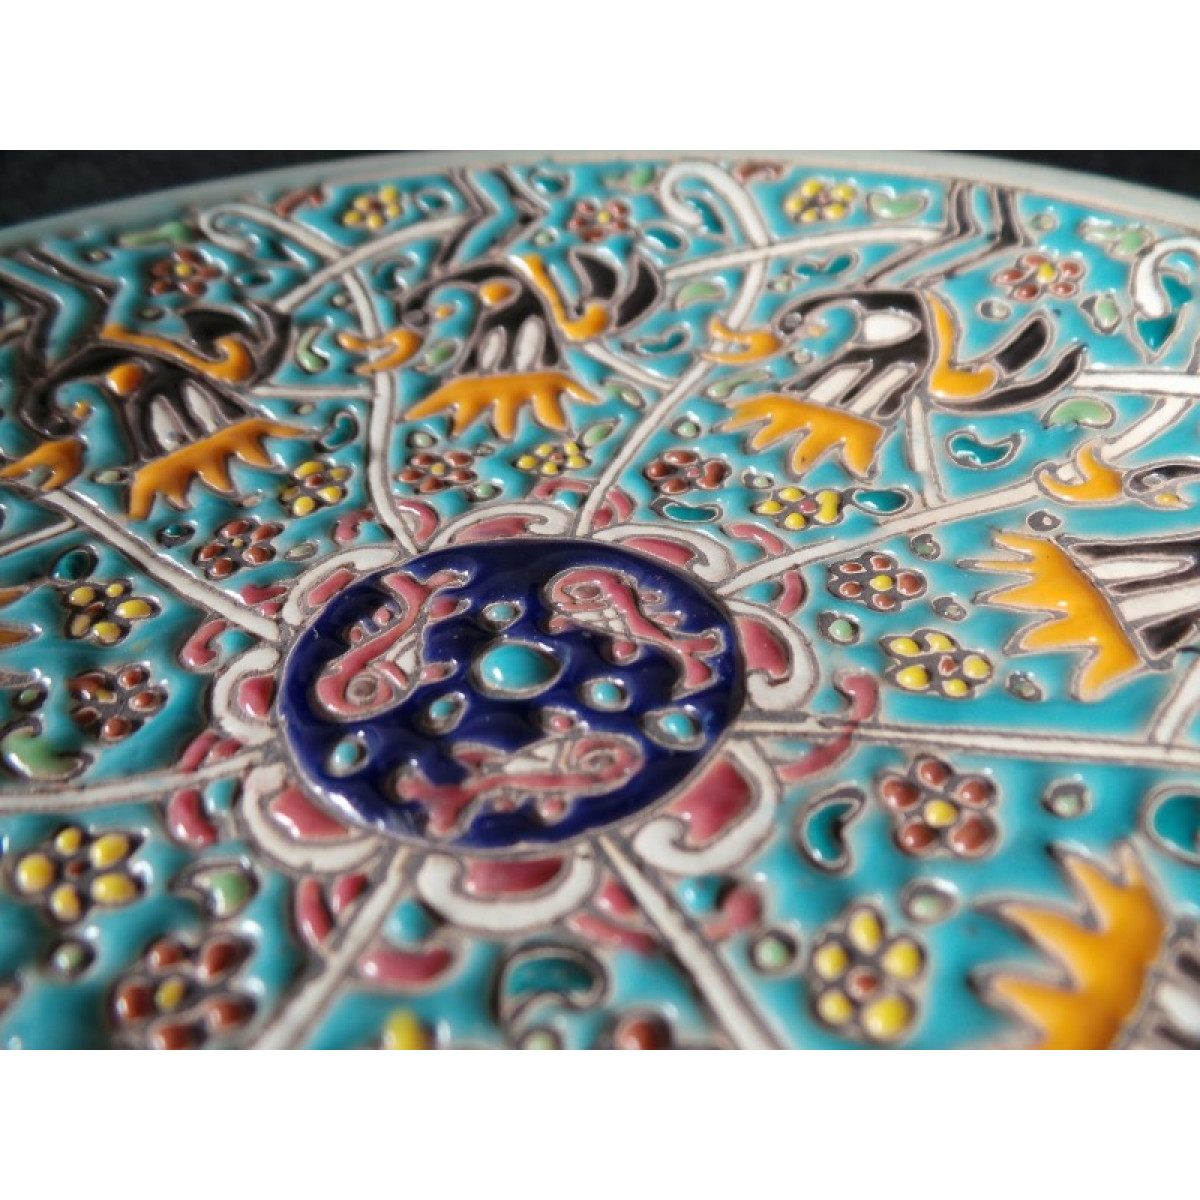  Enameled Pottery Plate & Dish - HE1029